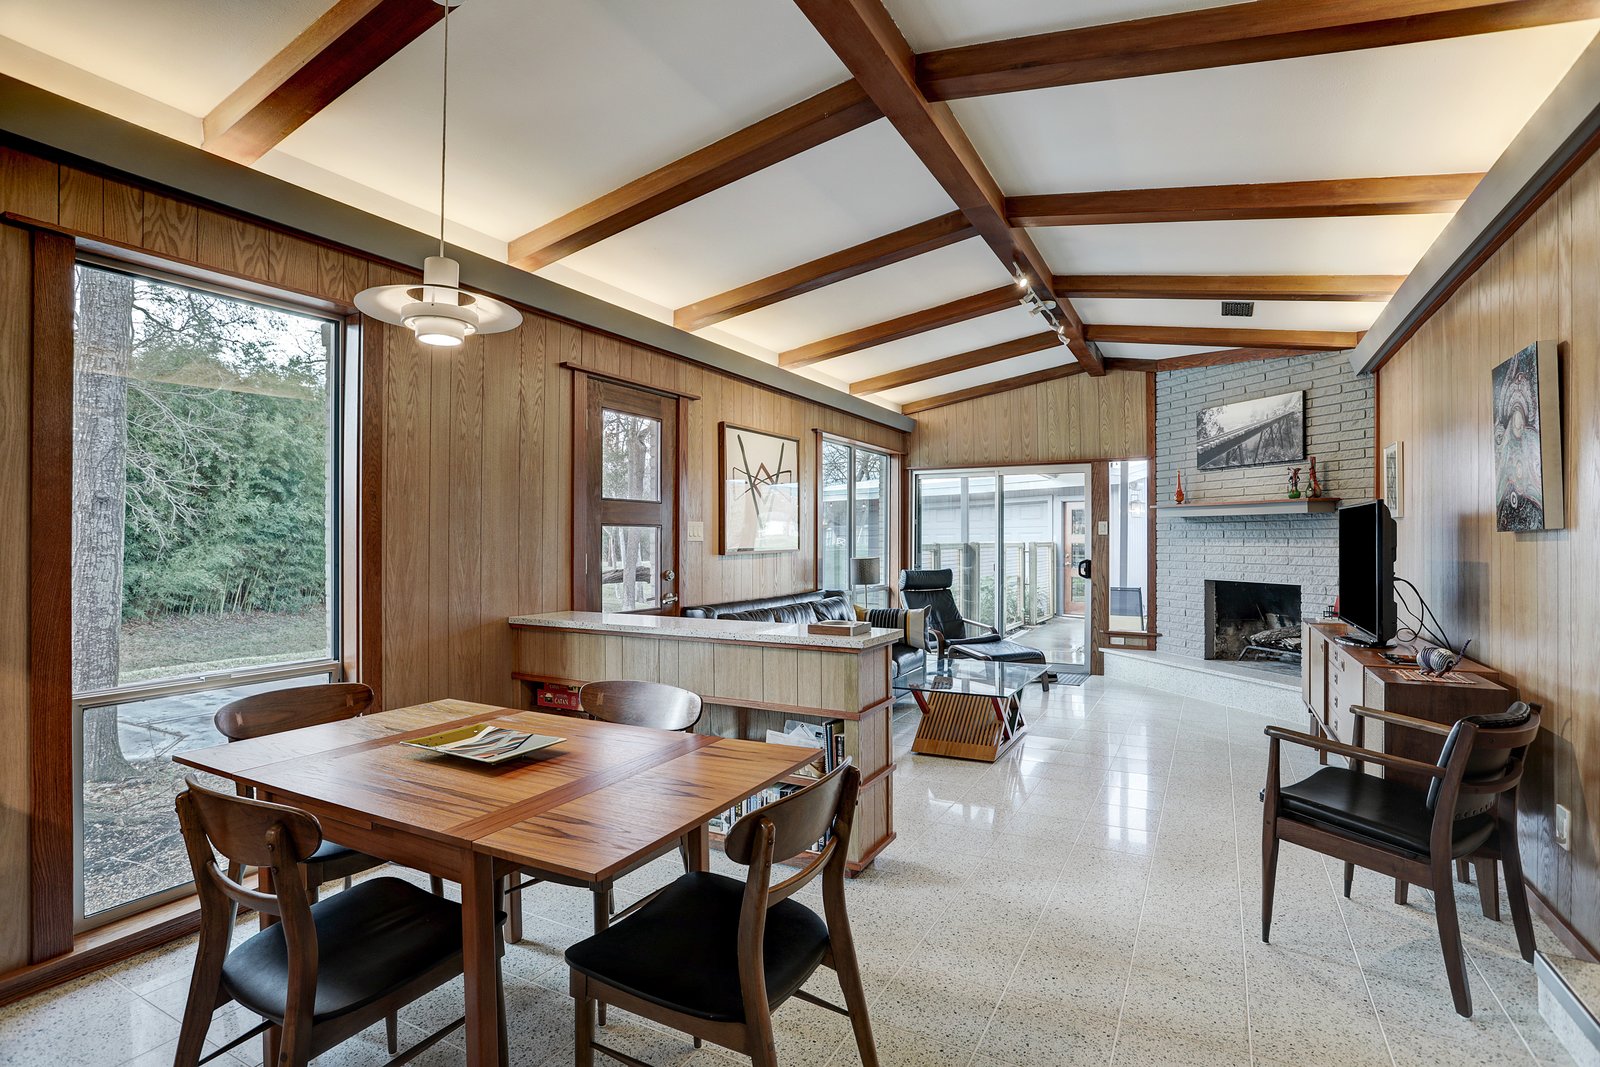 Sporting restored midcentury furniture, the main great room is a time capsule in itself. Wood beams contrast with the crisp white, vaulted ceilings, which provide indirect cove lighting. An original fireplace sits tucked in the corner.